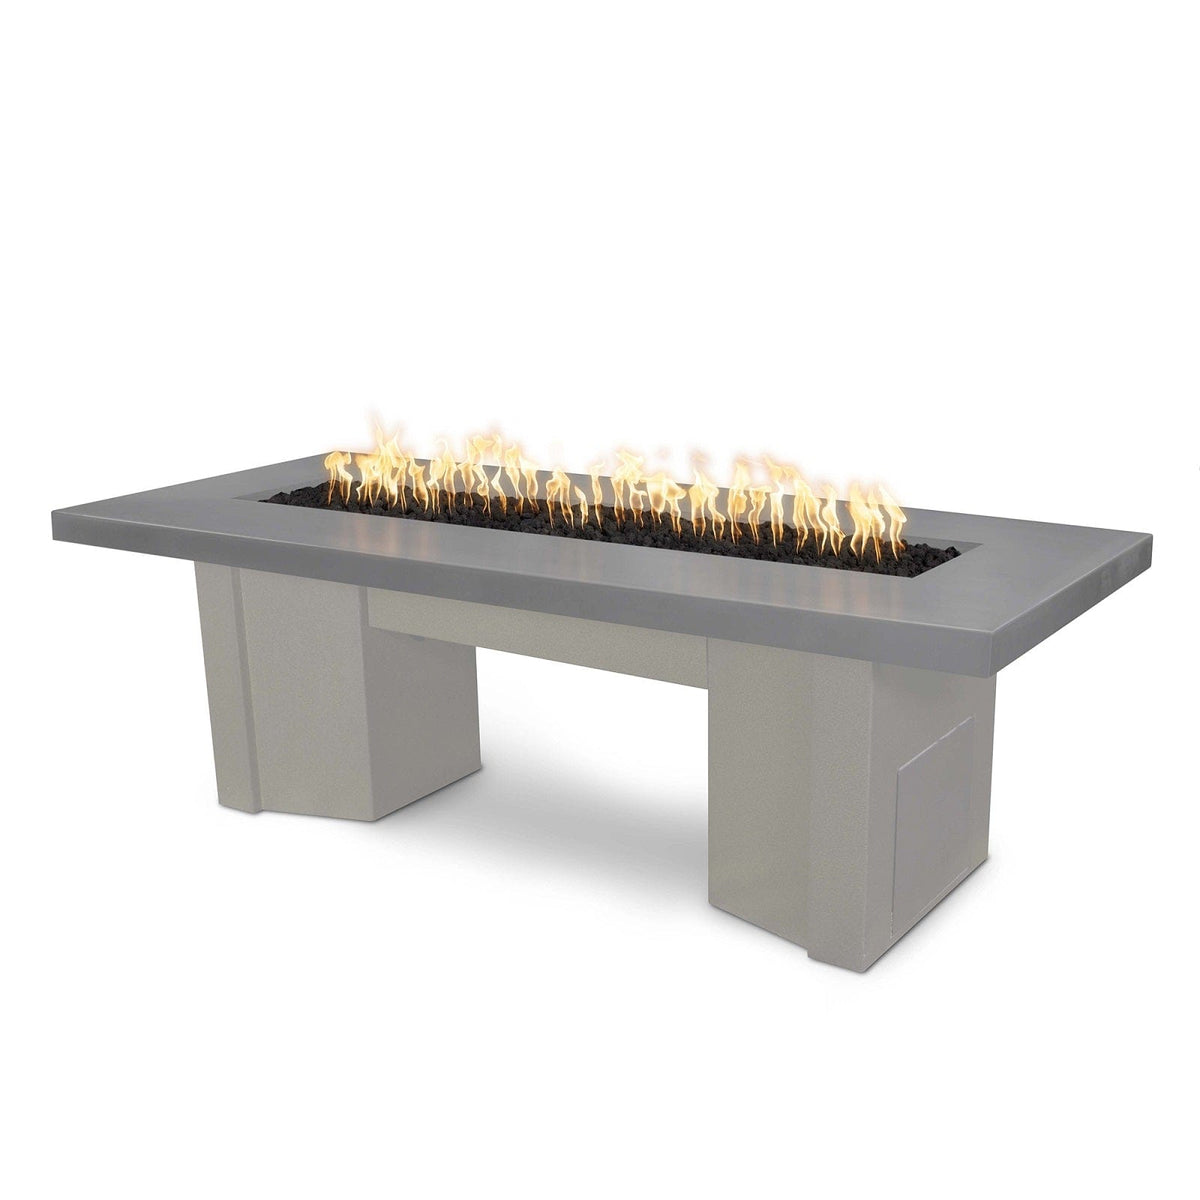 The Outdoor Plus Fire Features Natural Gray (-NGY) / Pewter Powder Coated Steel (-PEW) The Outdoor Plus 60&quot; Alameda Fire Table Smooth Concrete in Liquid Propane - Flame Sense System with Push Button Spark Igniter / OPT-ALMGFRC60FSEN-LP